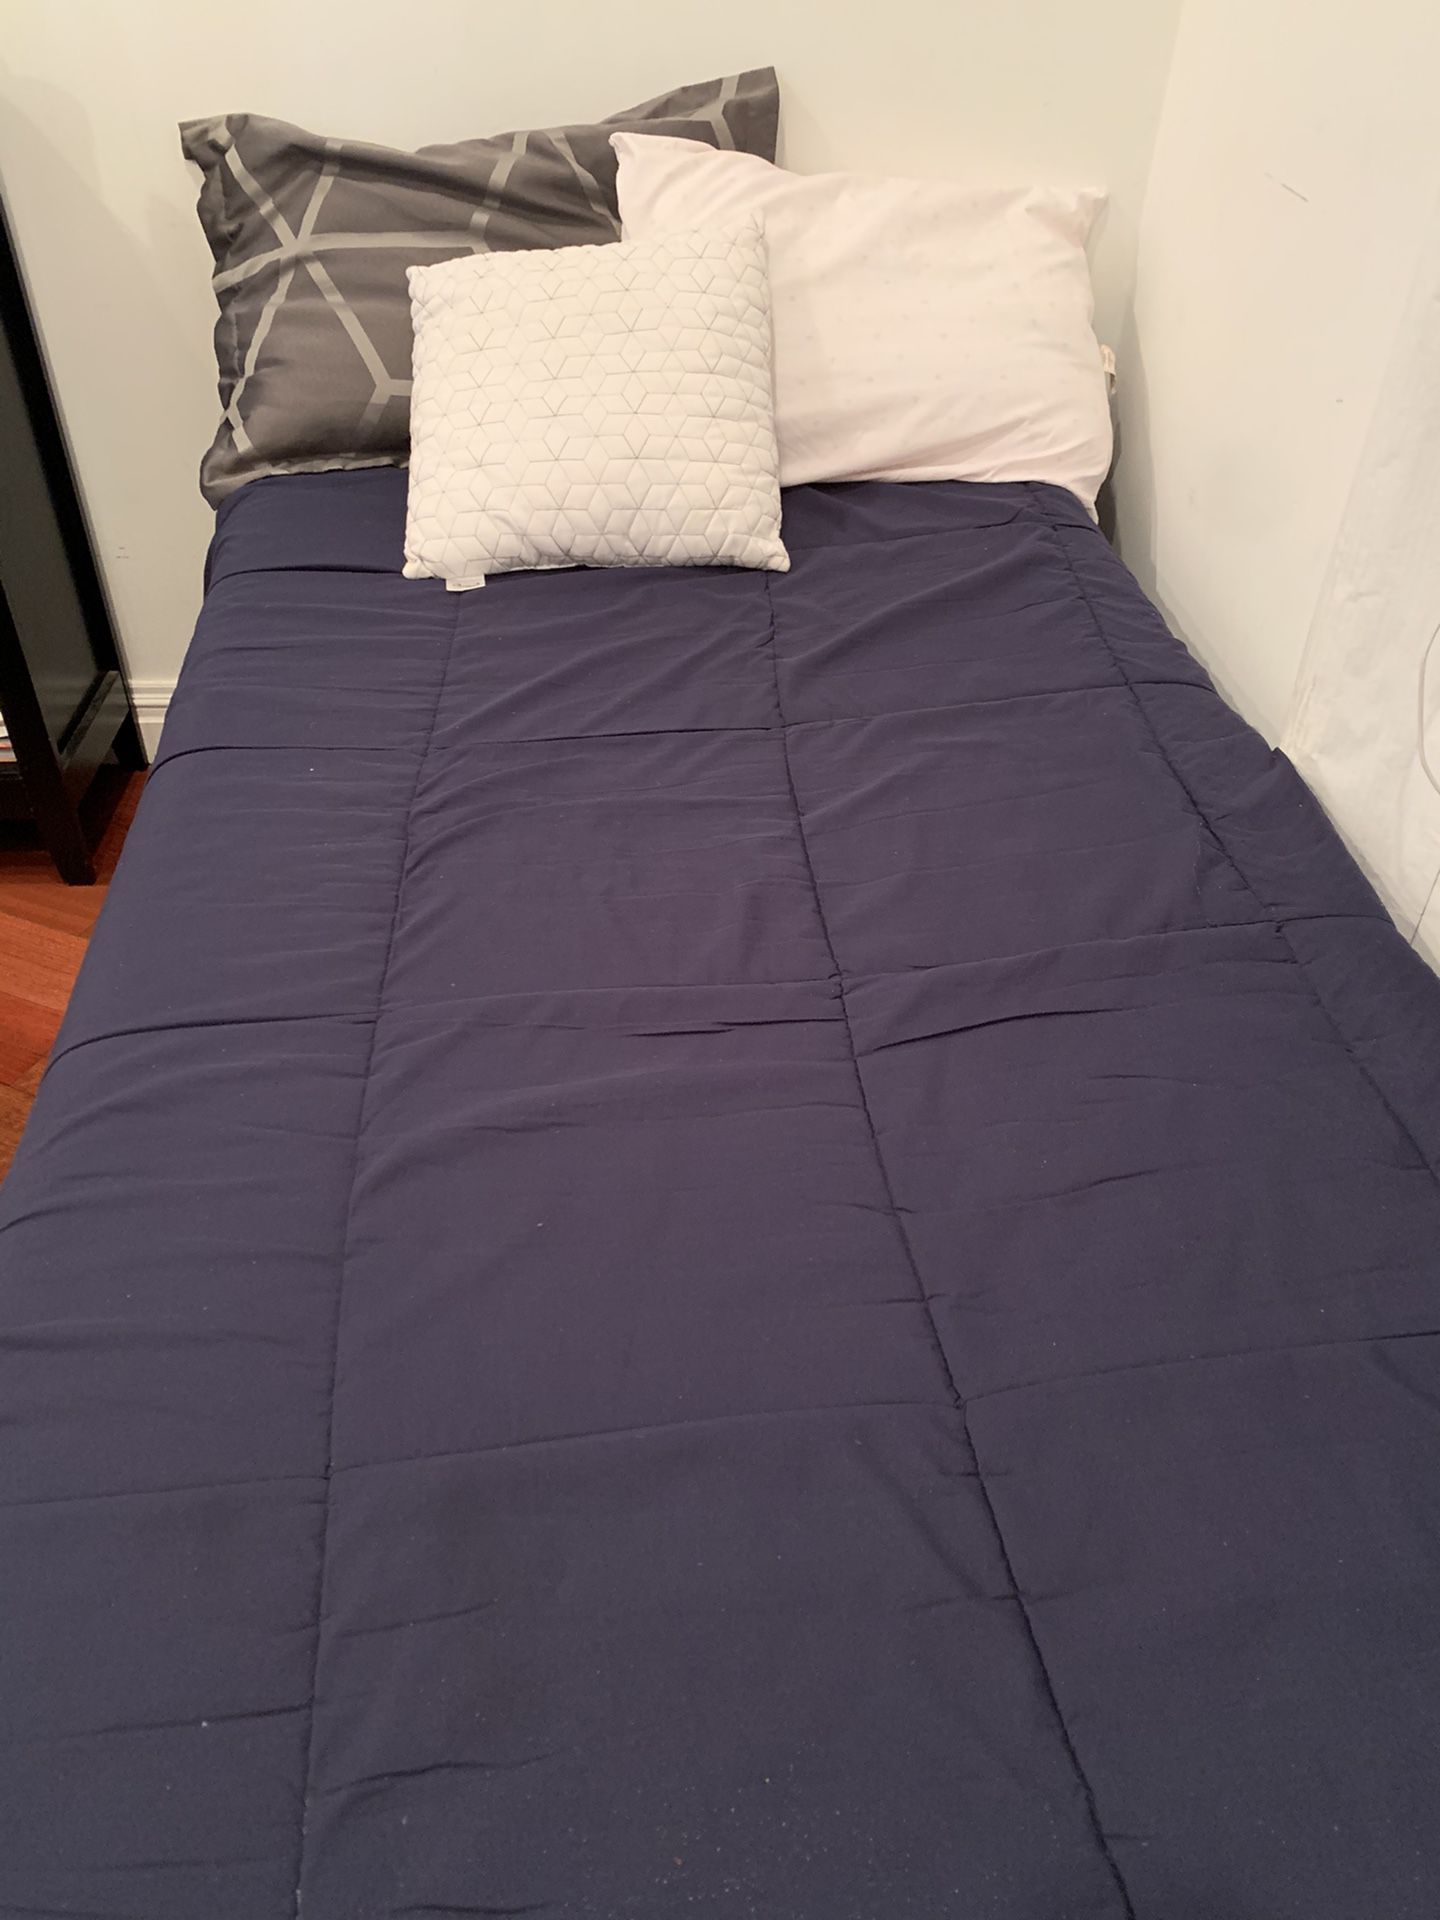 Selling Twin Size bed with box spring, bed frame and mattress